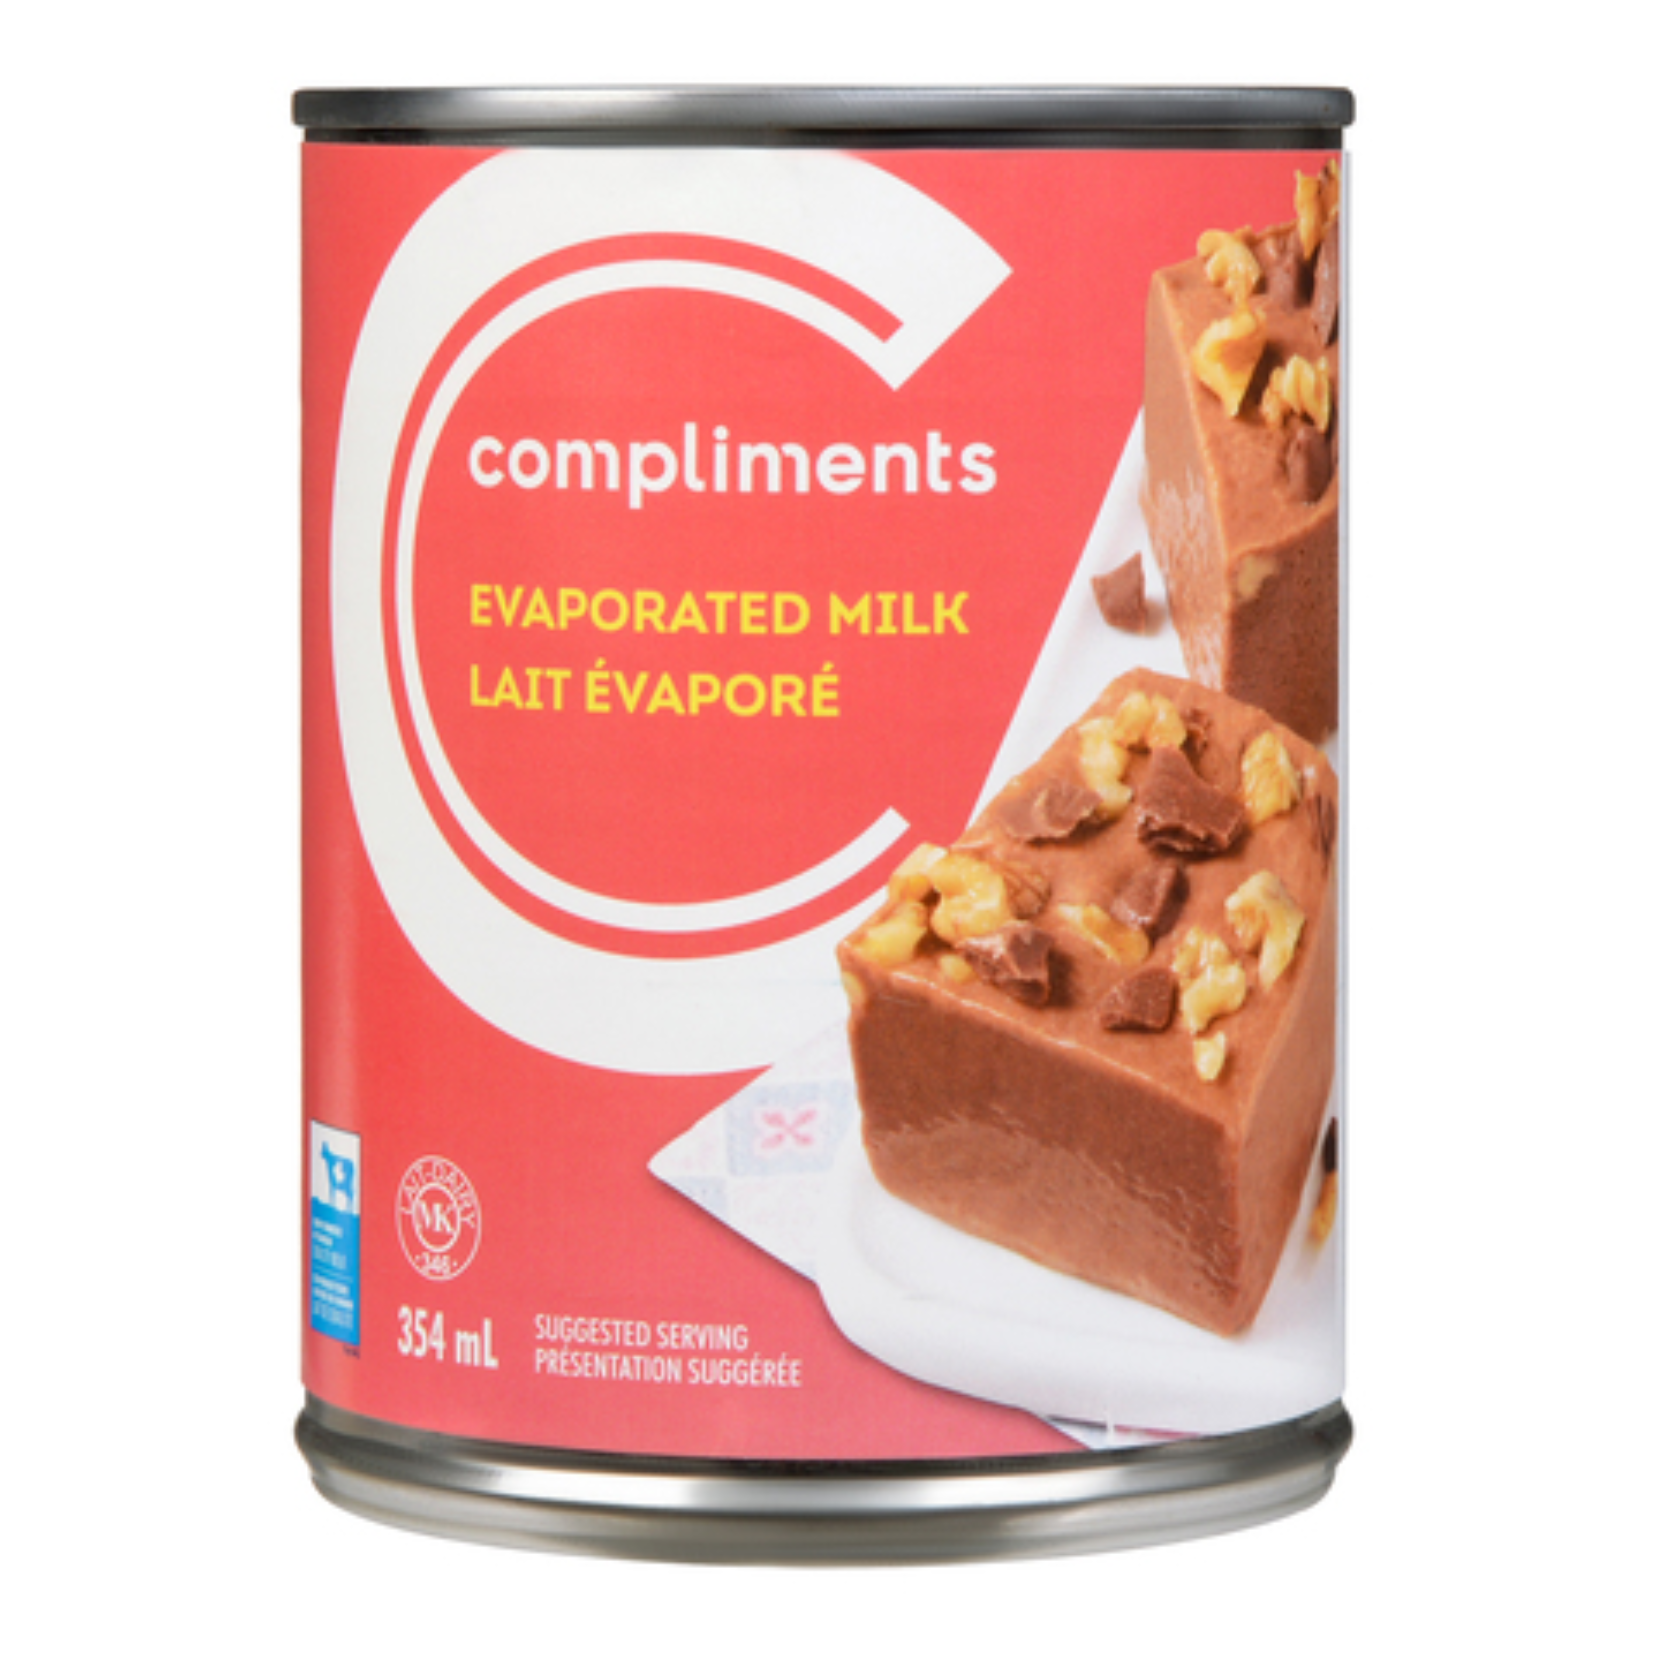 Compliments Evaporated Milk 354ml